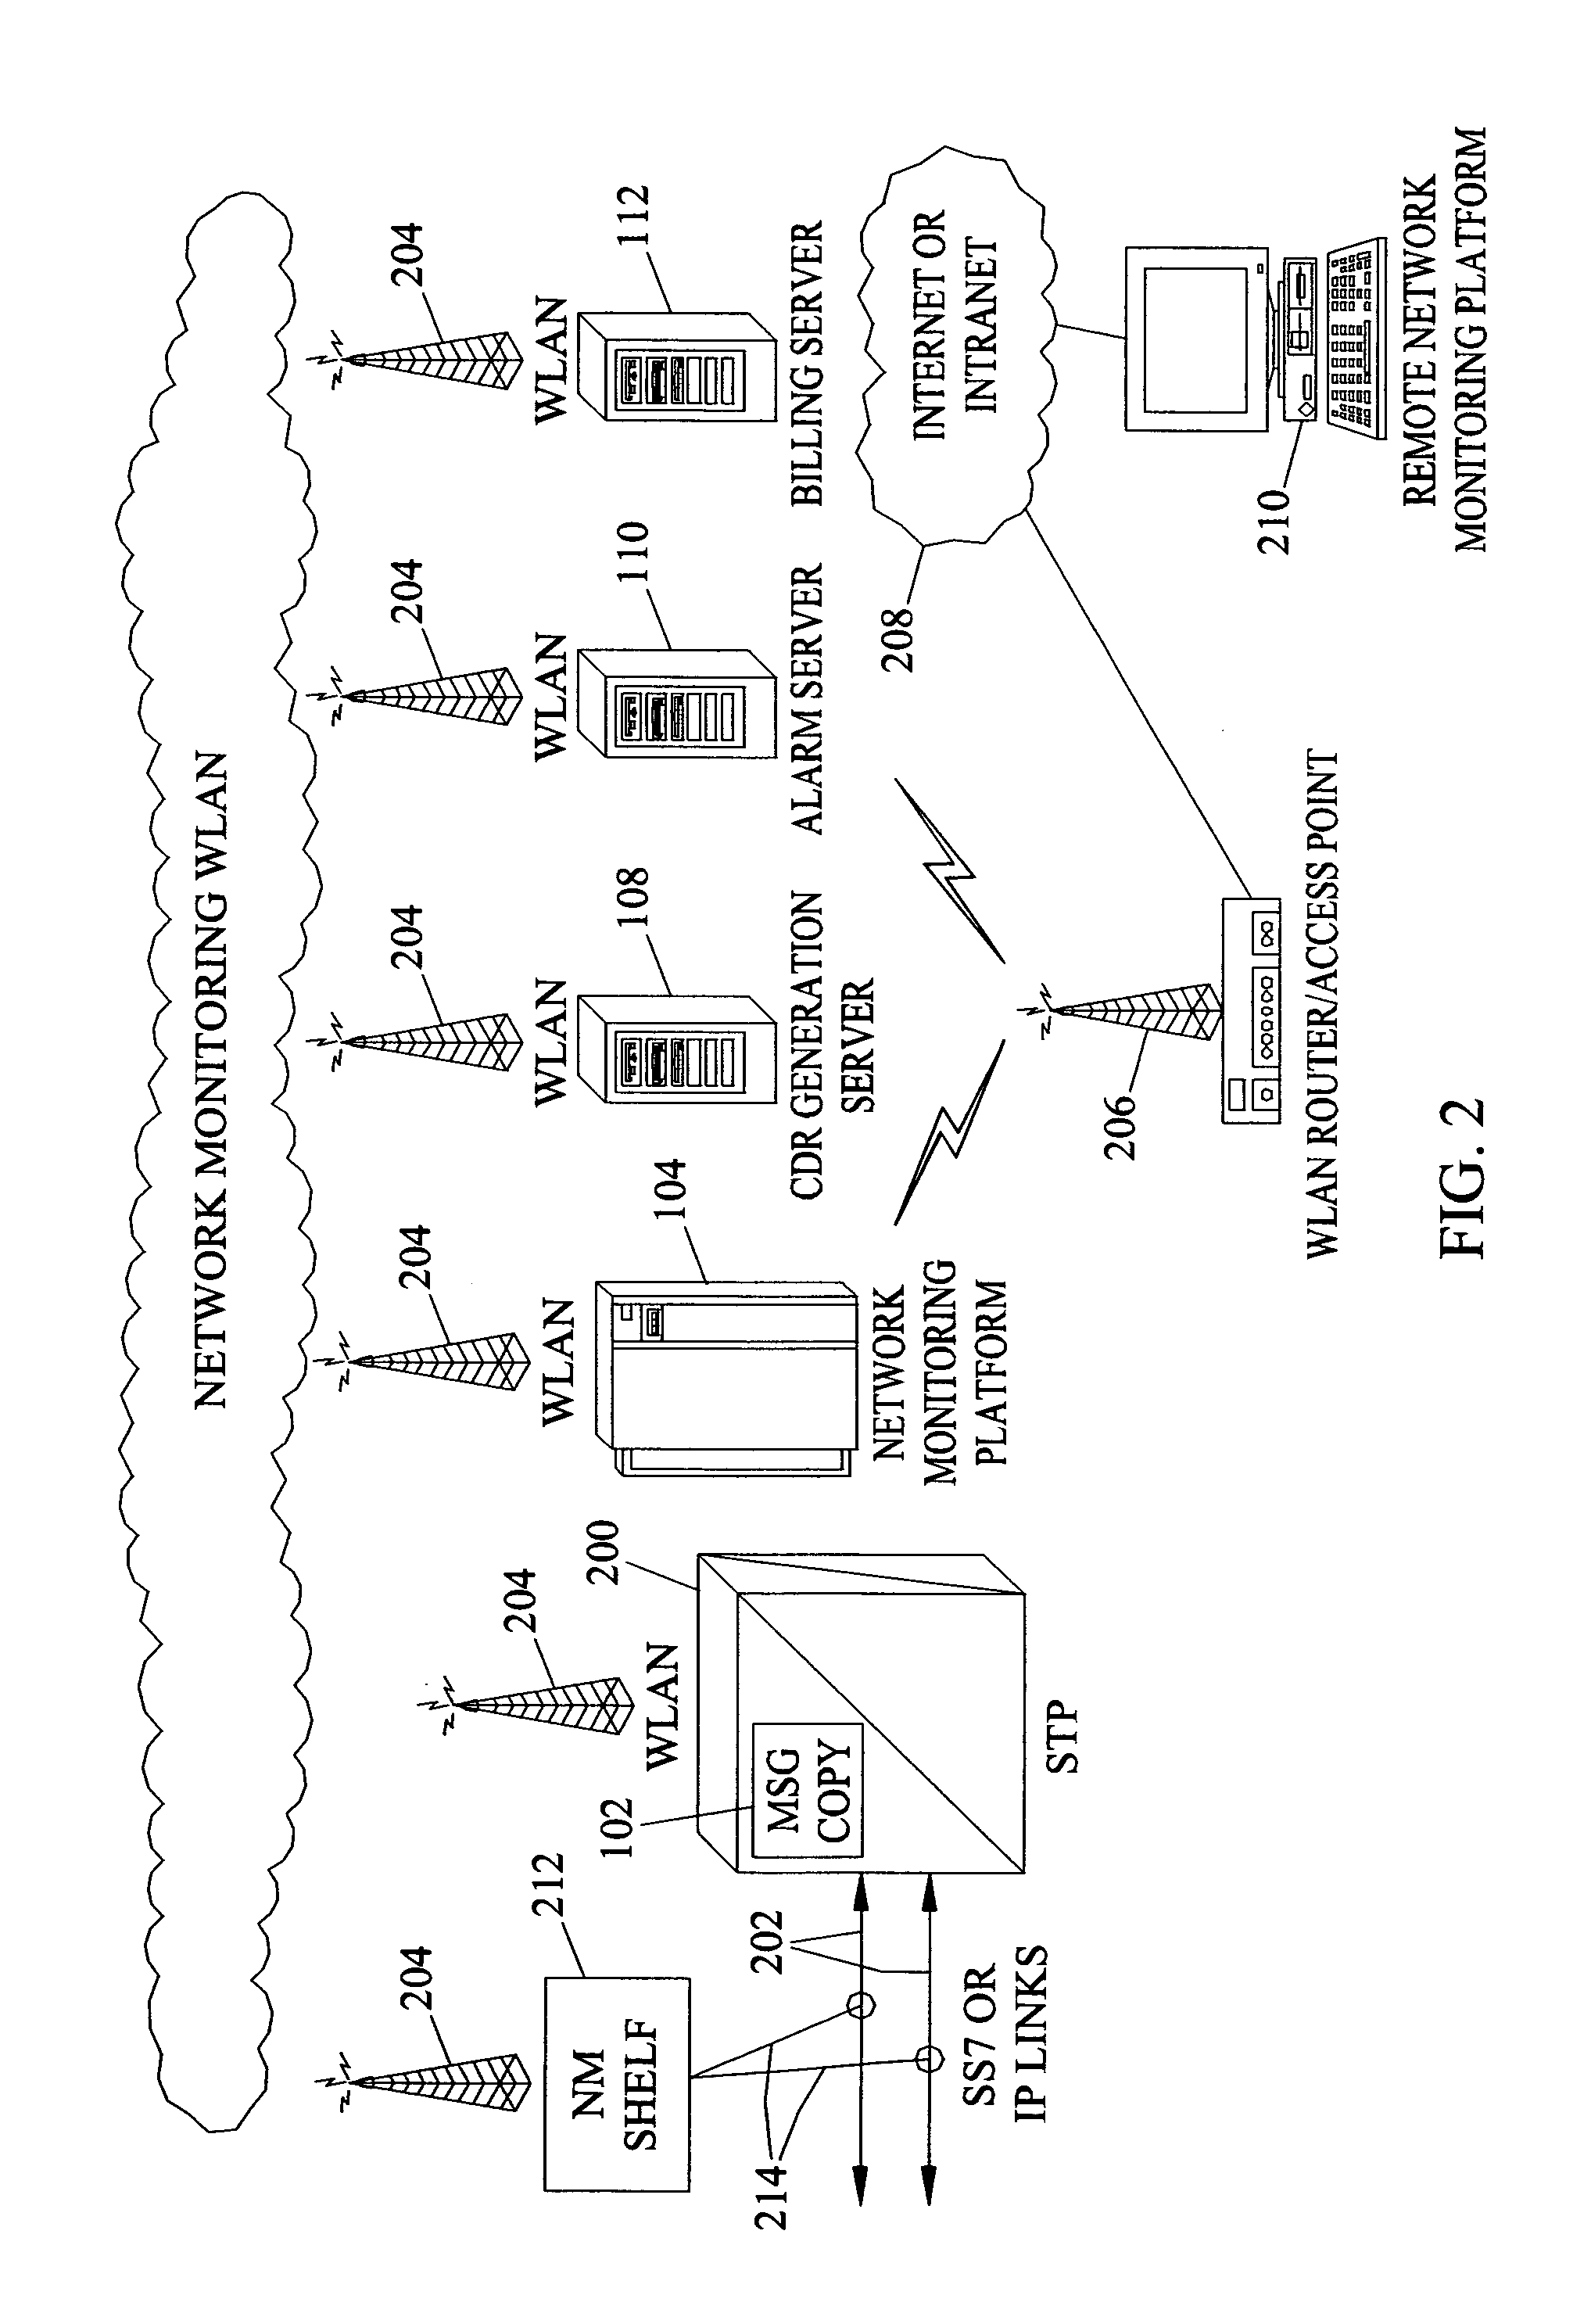 Methods and systems for wireless local area network (WLAN)-based signaling network monitoring